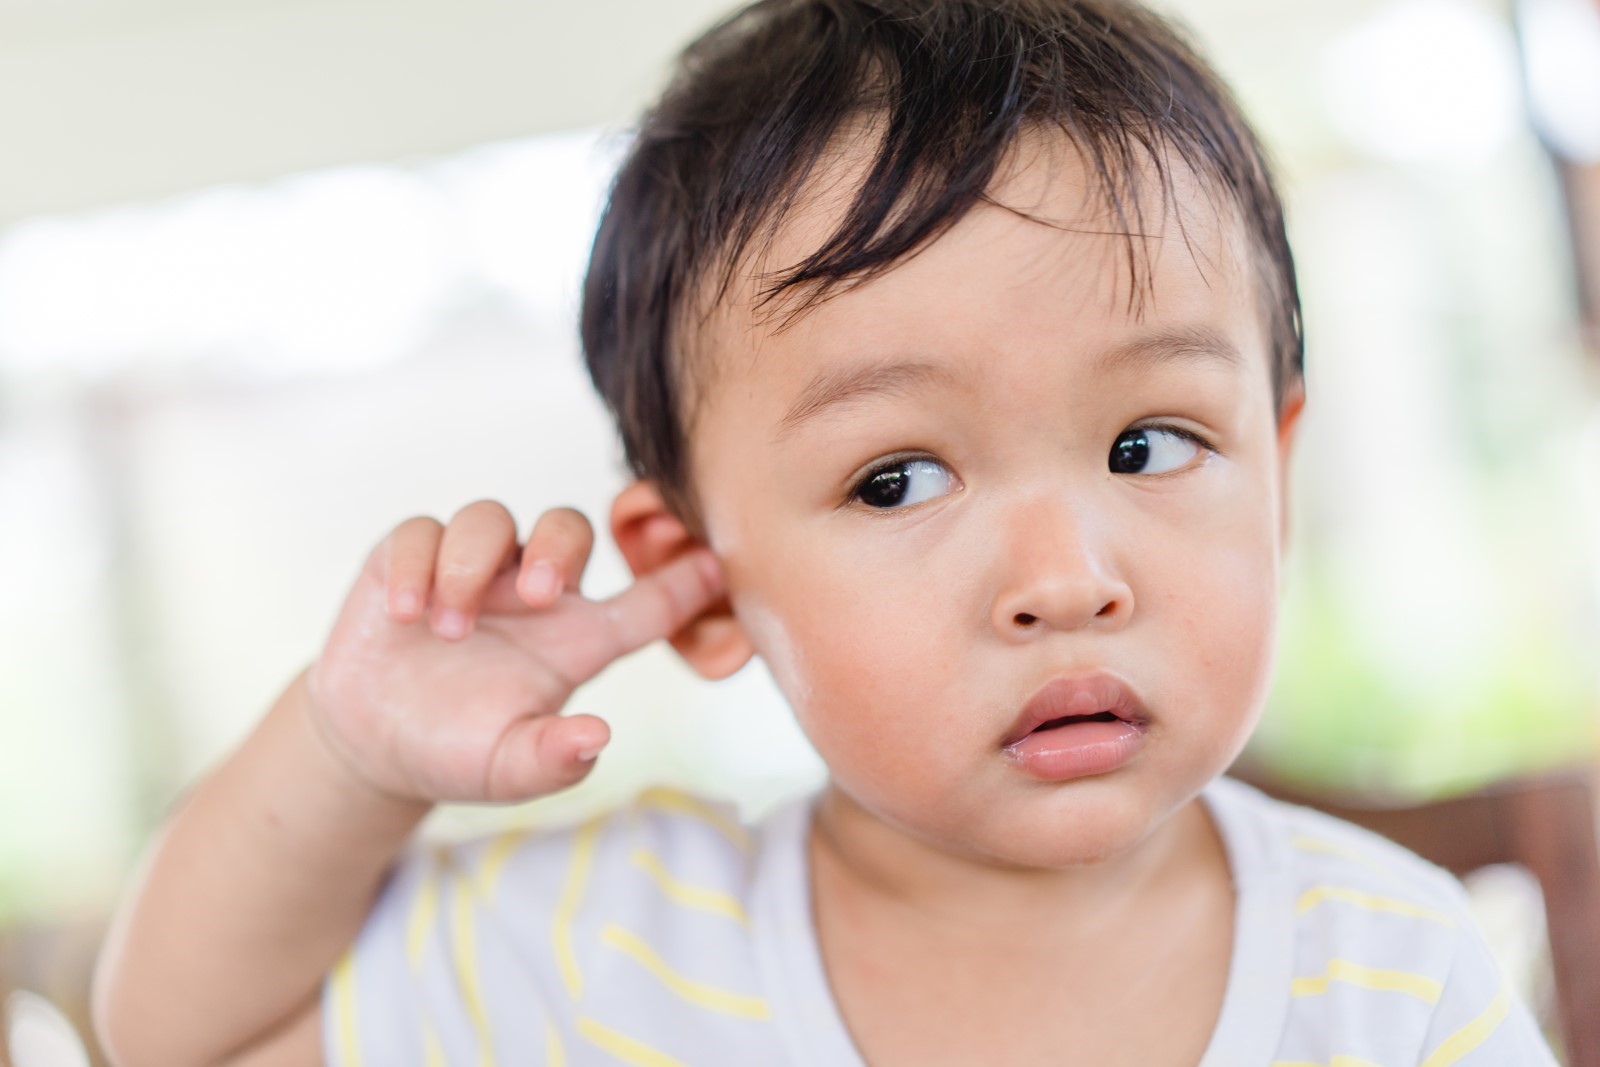 How Serious Are Ear Infections?